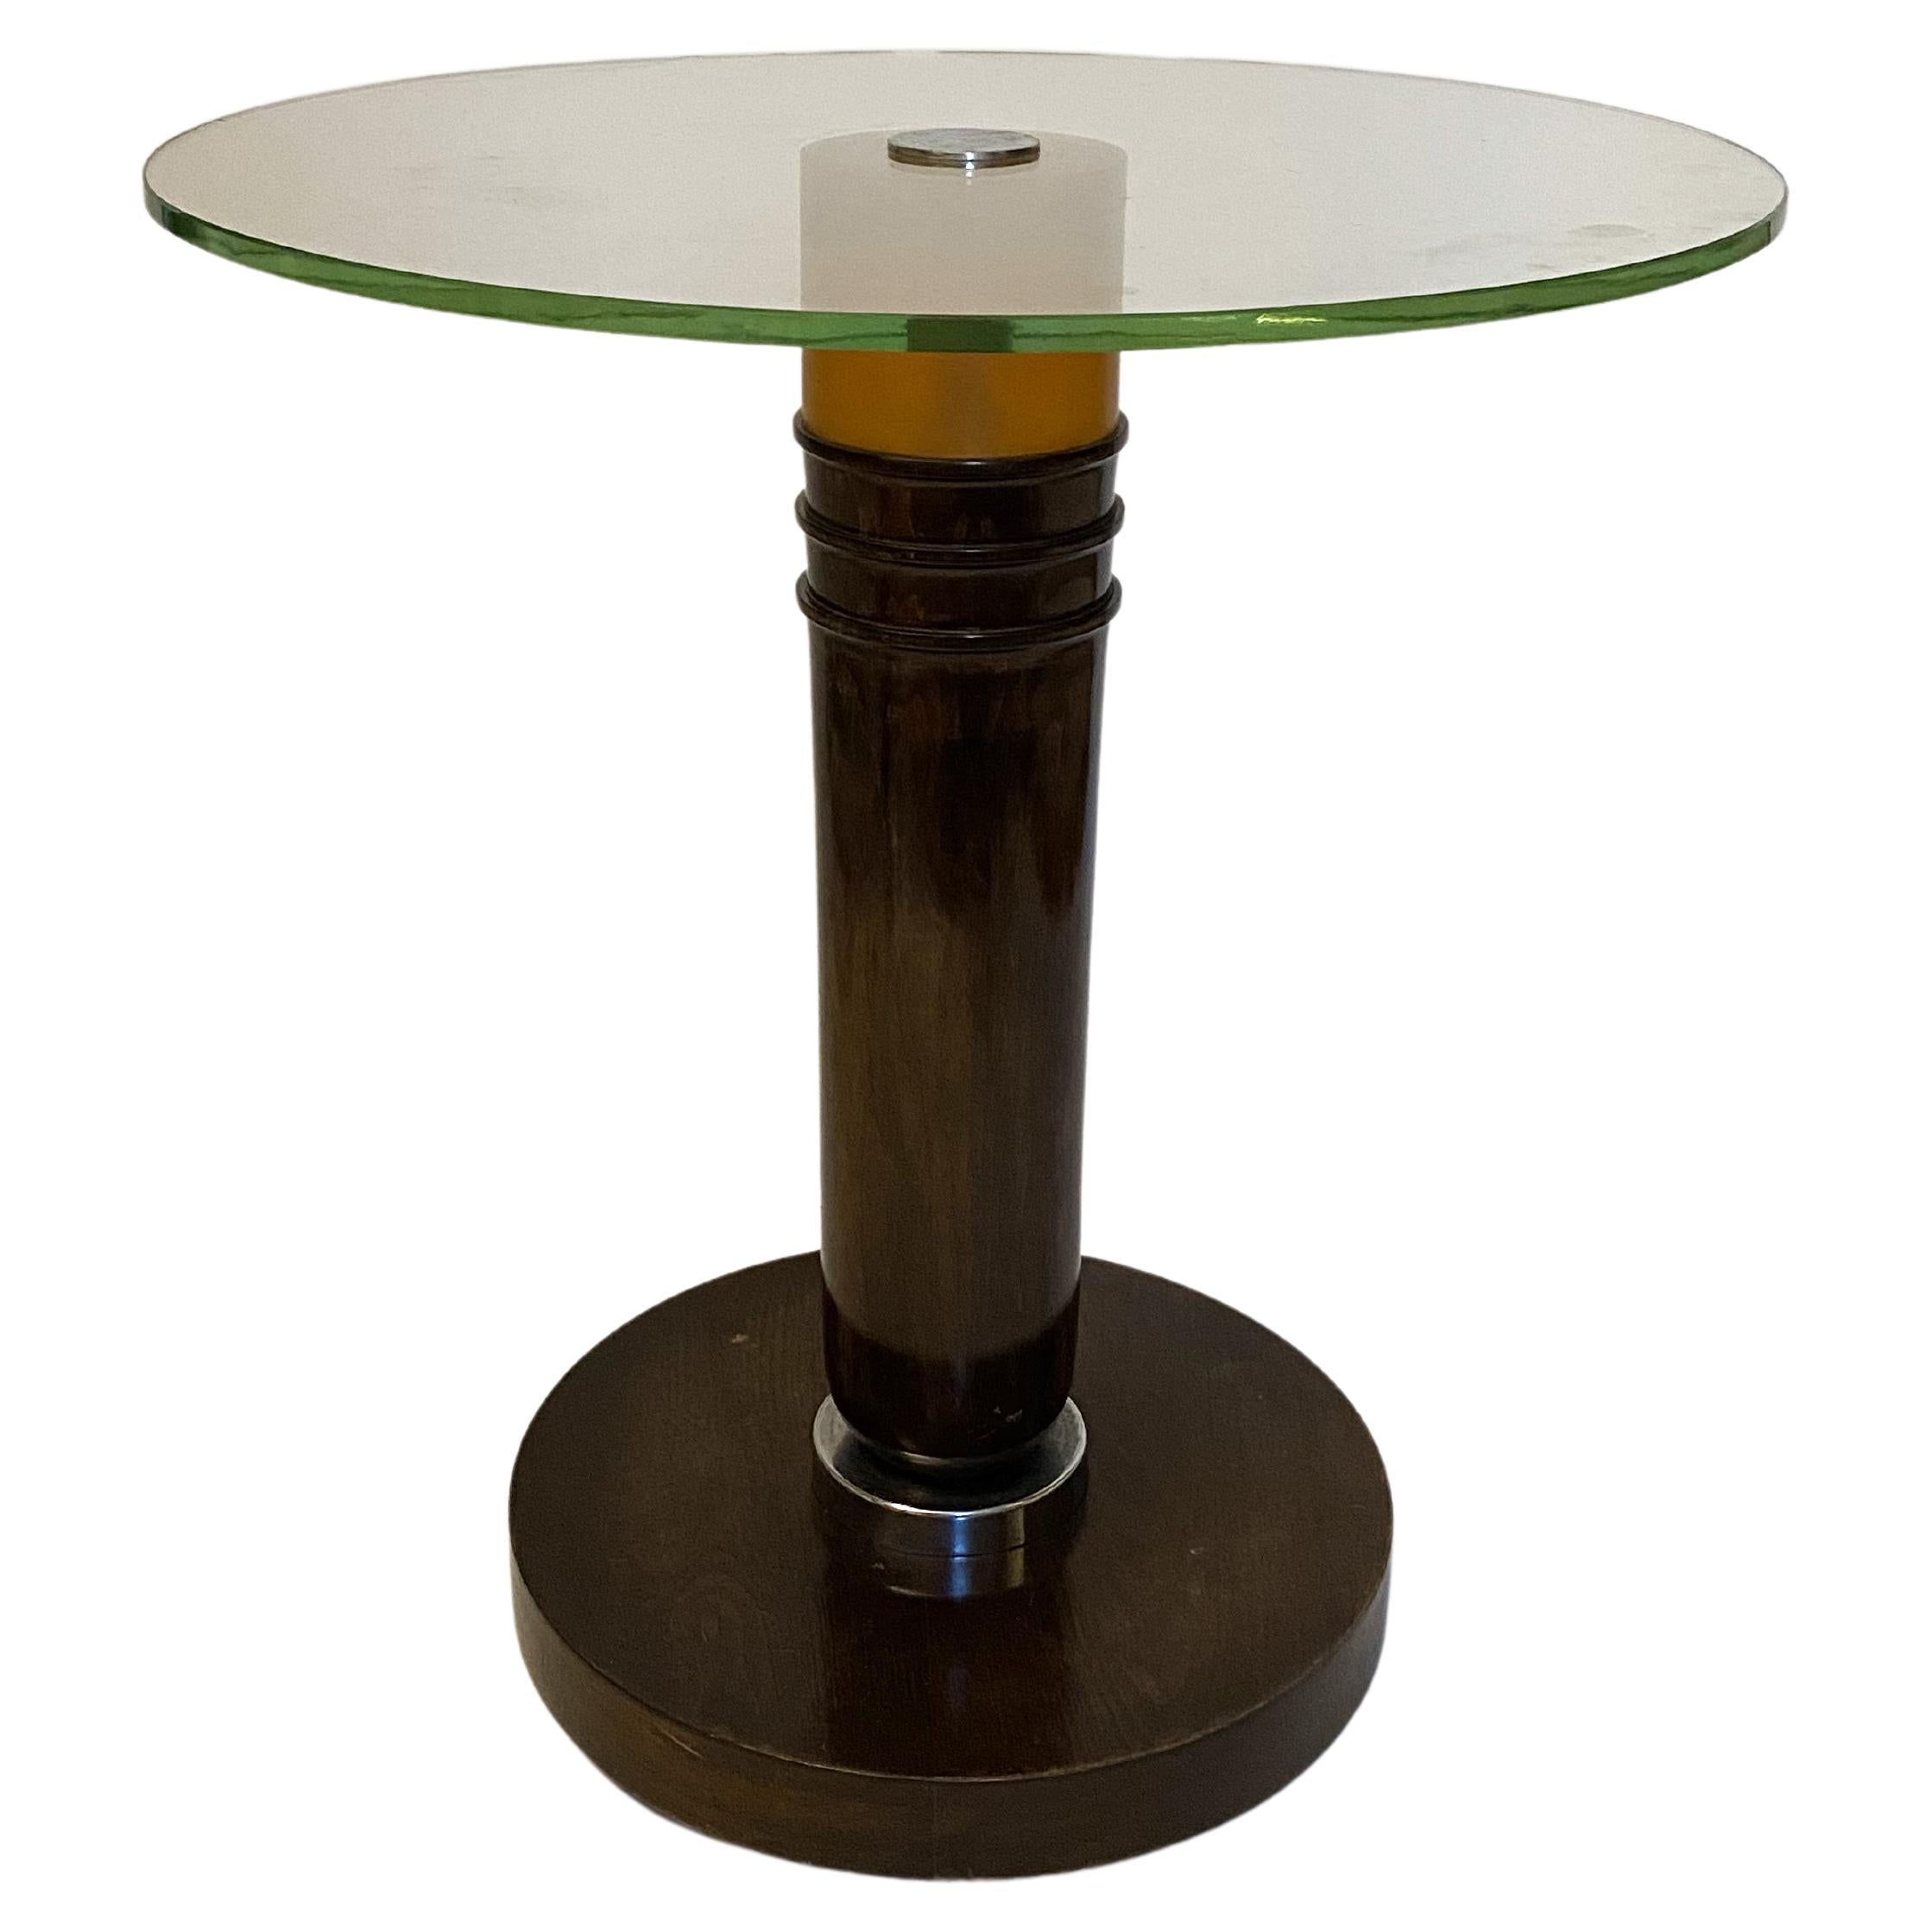 Modernist French Art Deco Side Table in the Style of Djo Bourgeois, 1930s